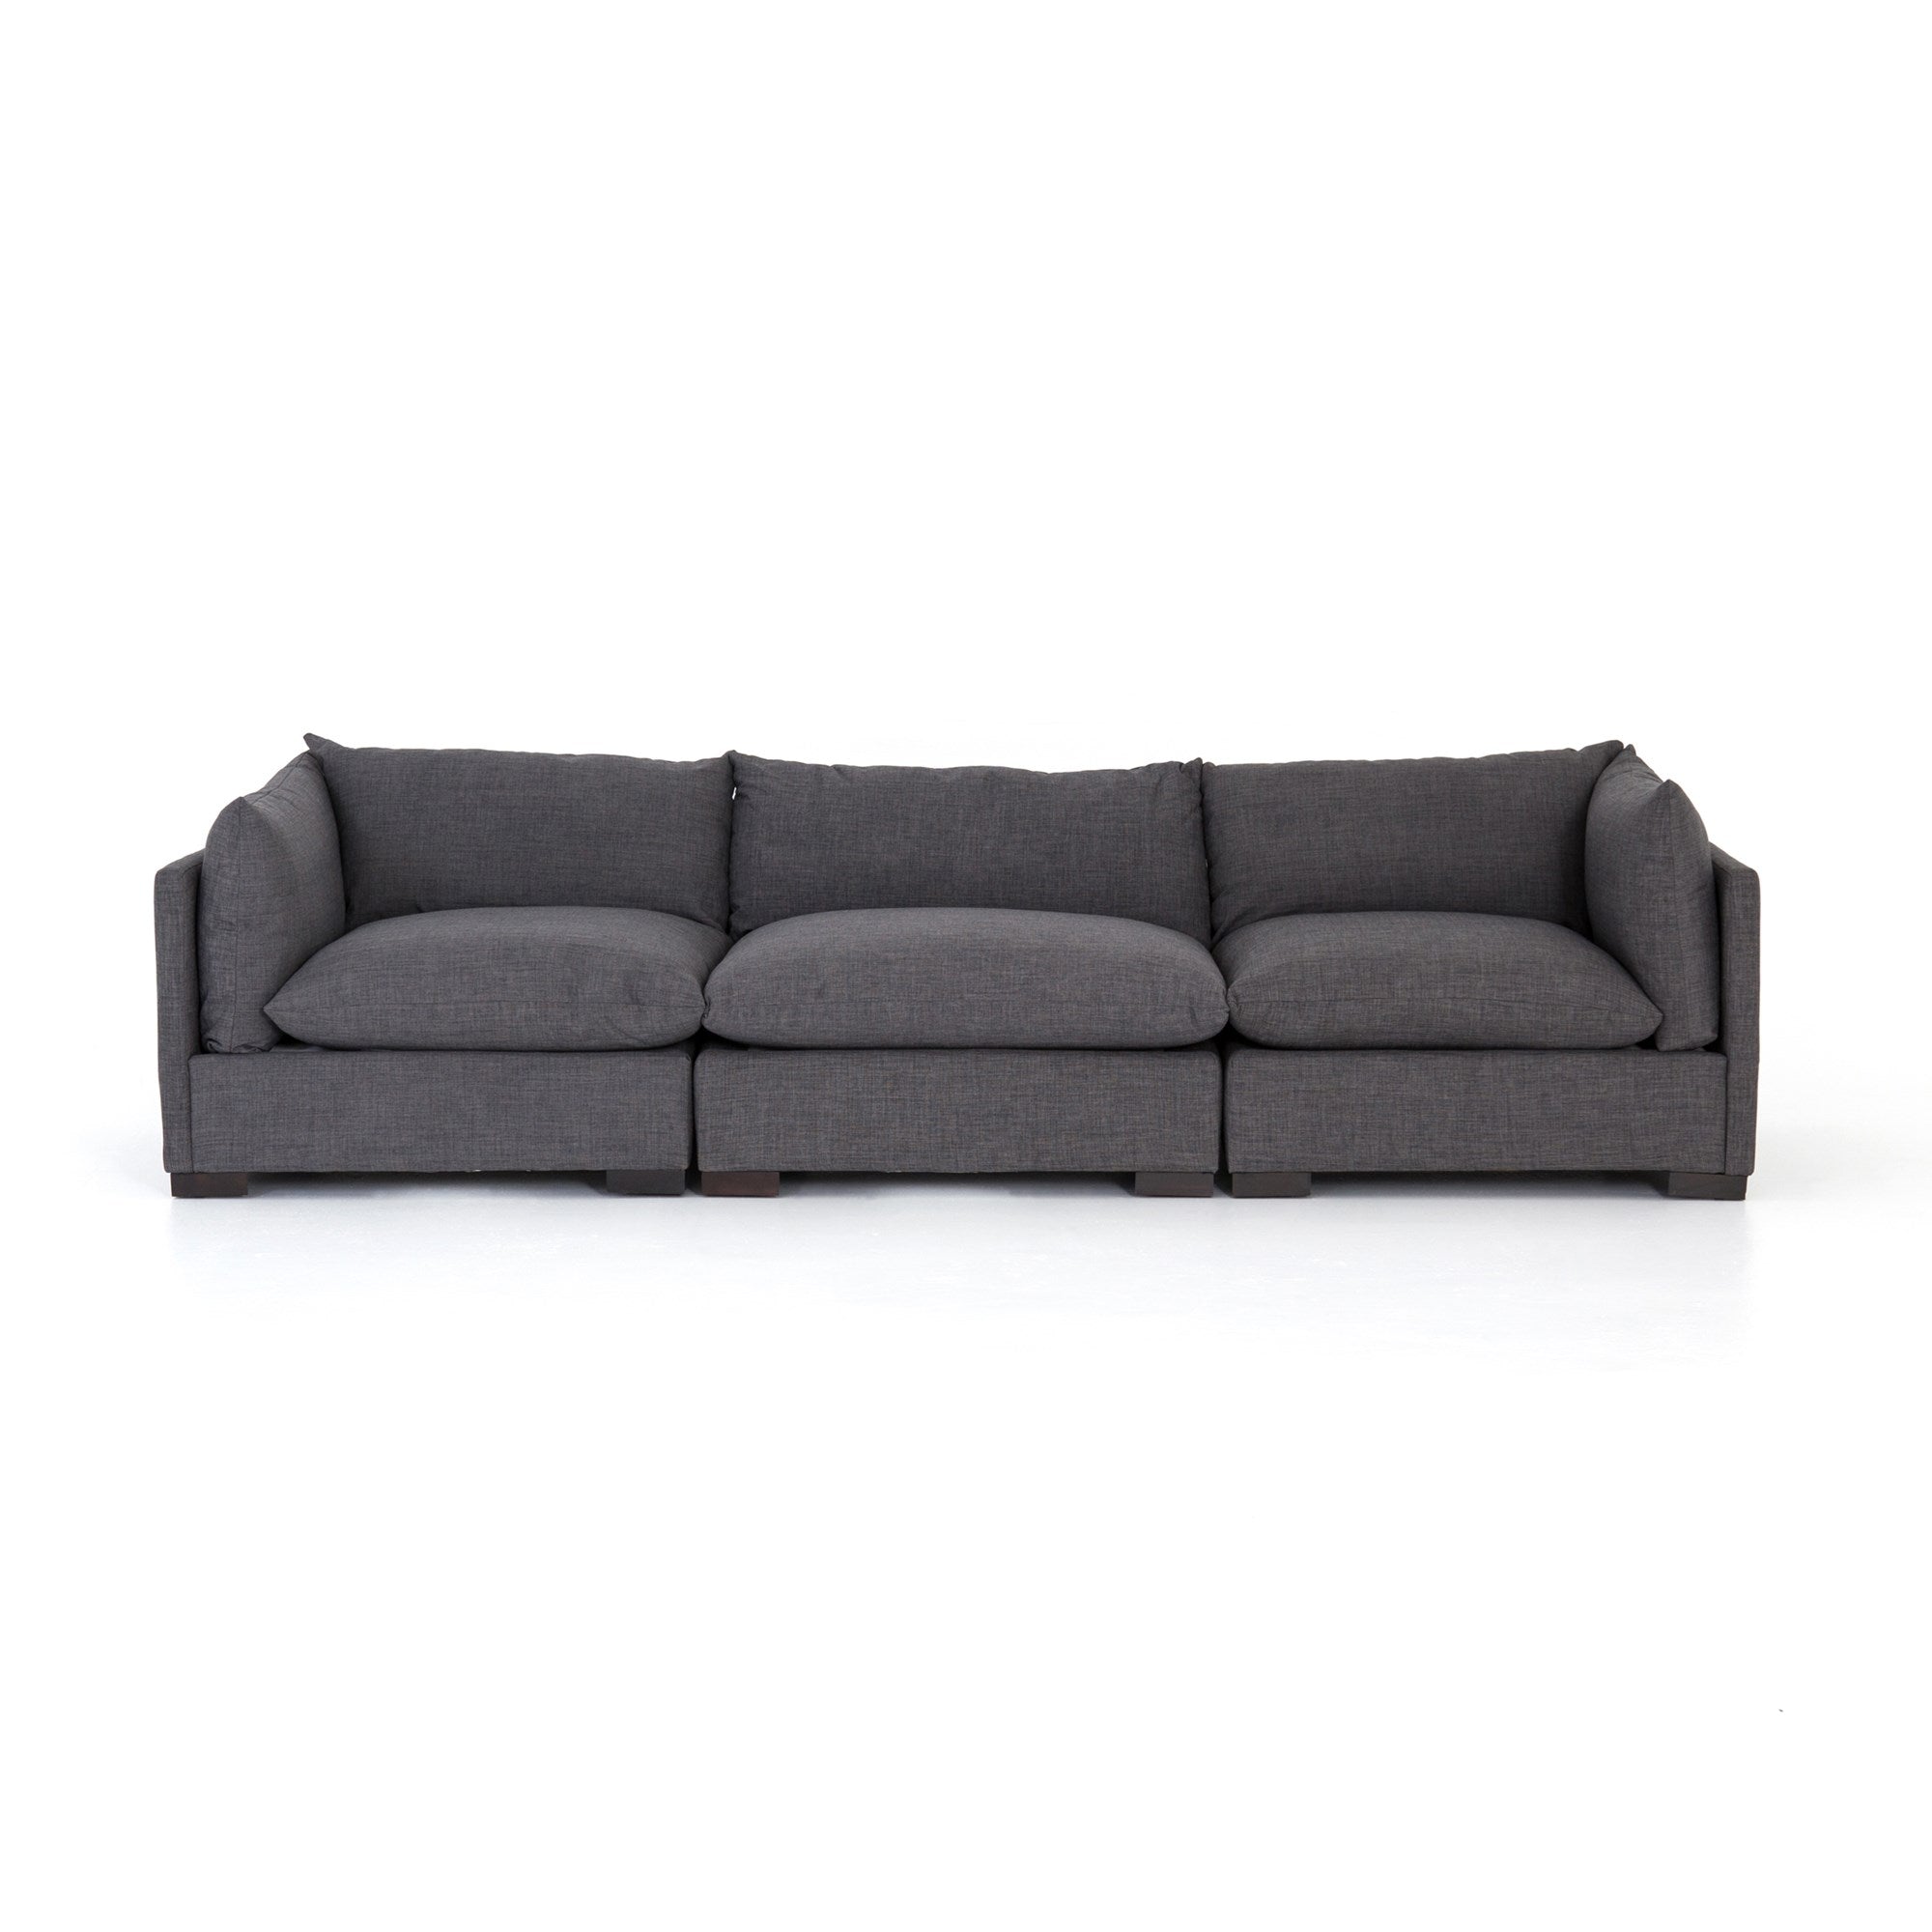 Westwood 3 Piece Sectional